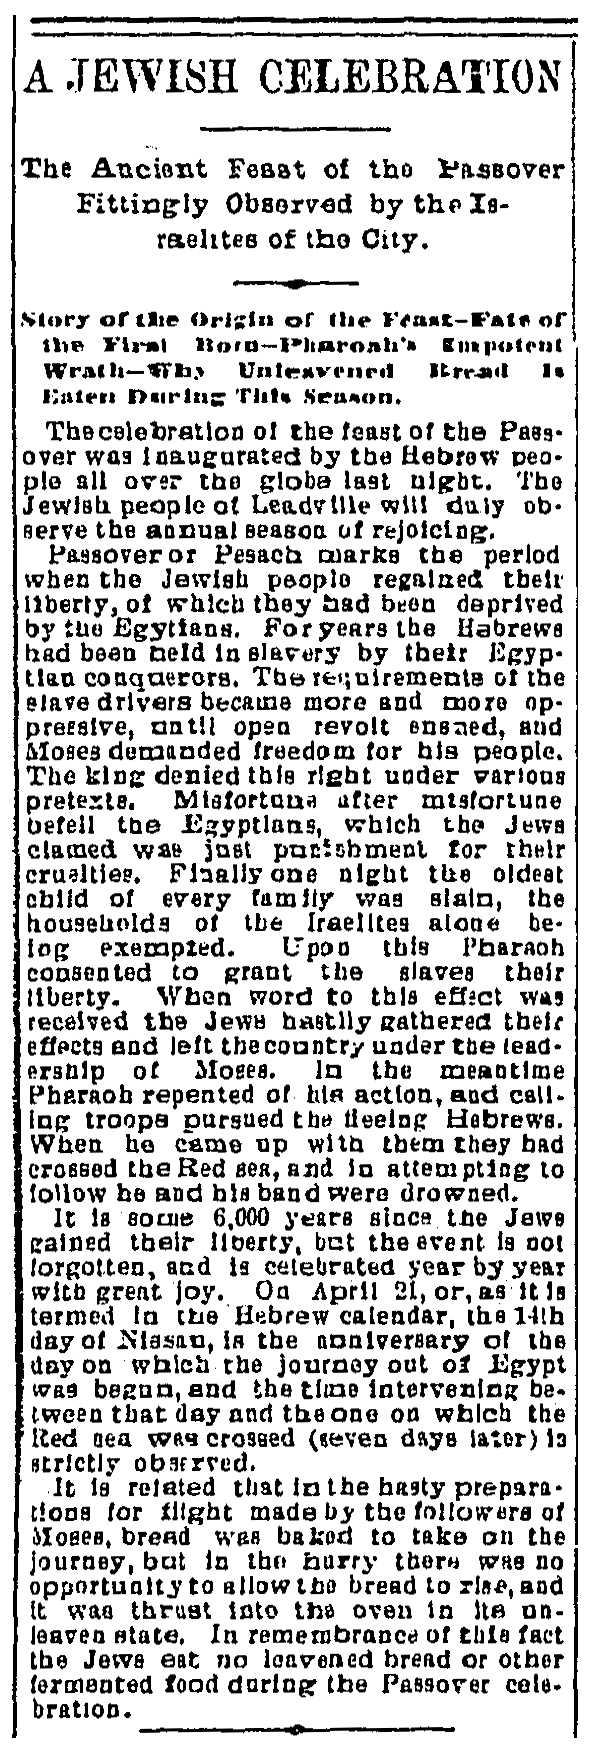 The Evening Chronicle. Saturday, April 21, 1894. Page 4.